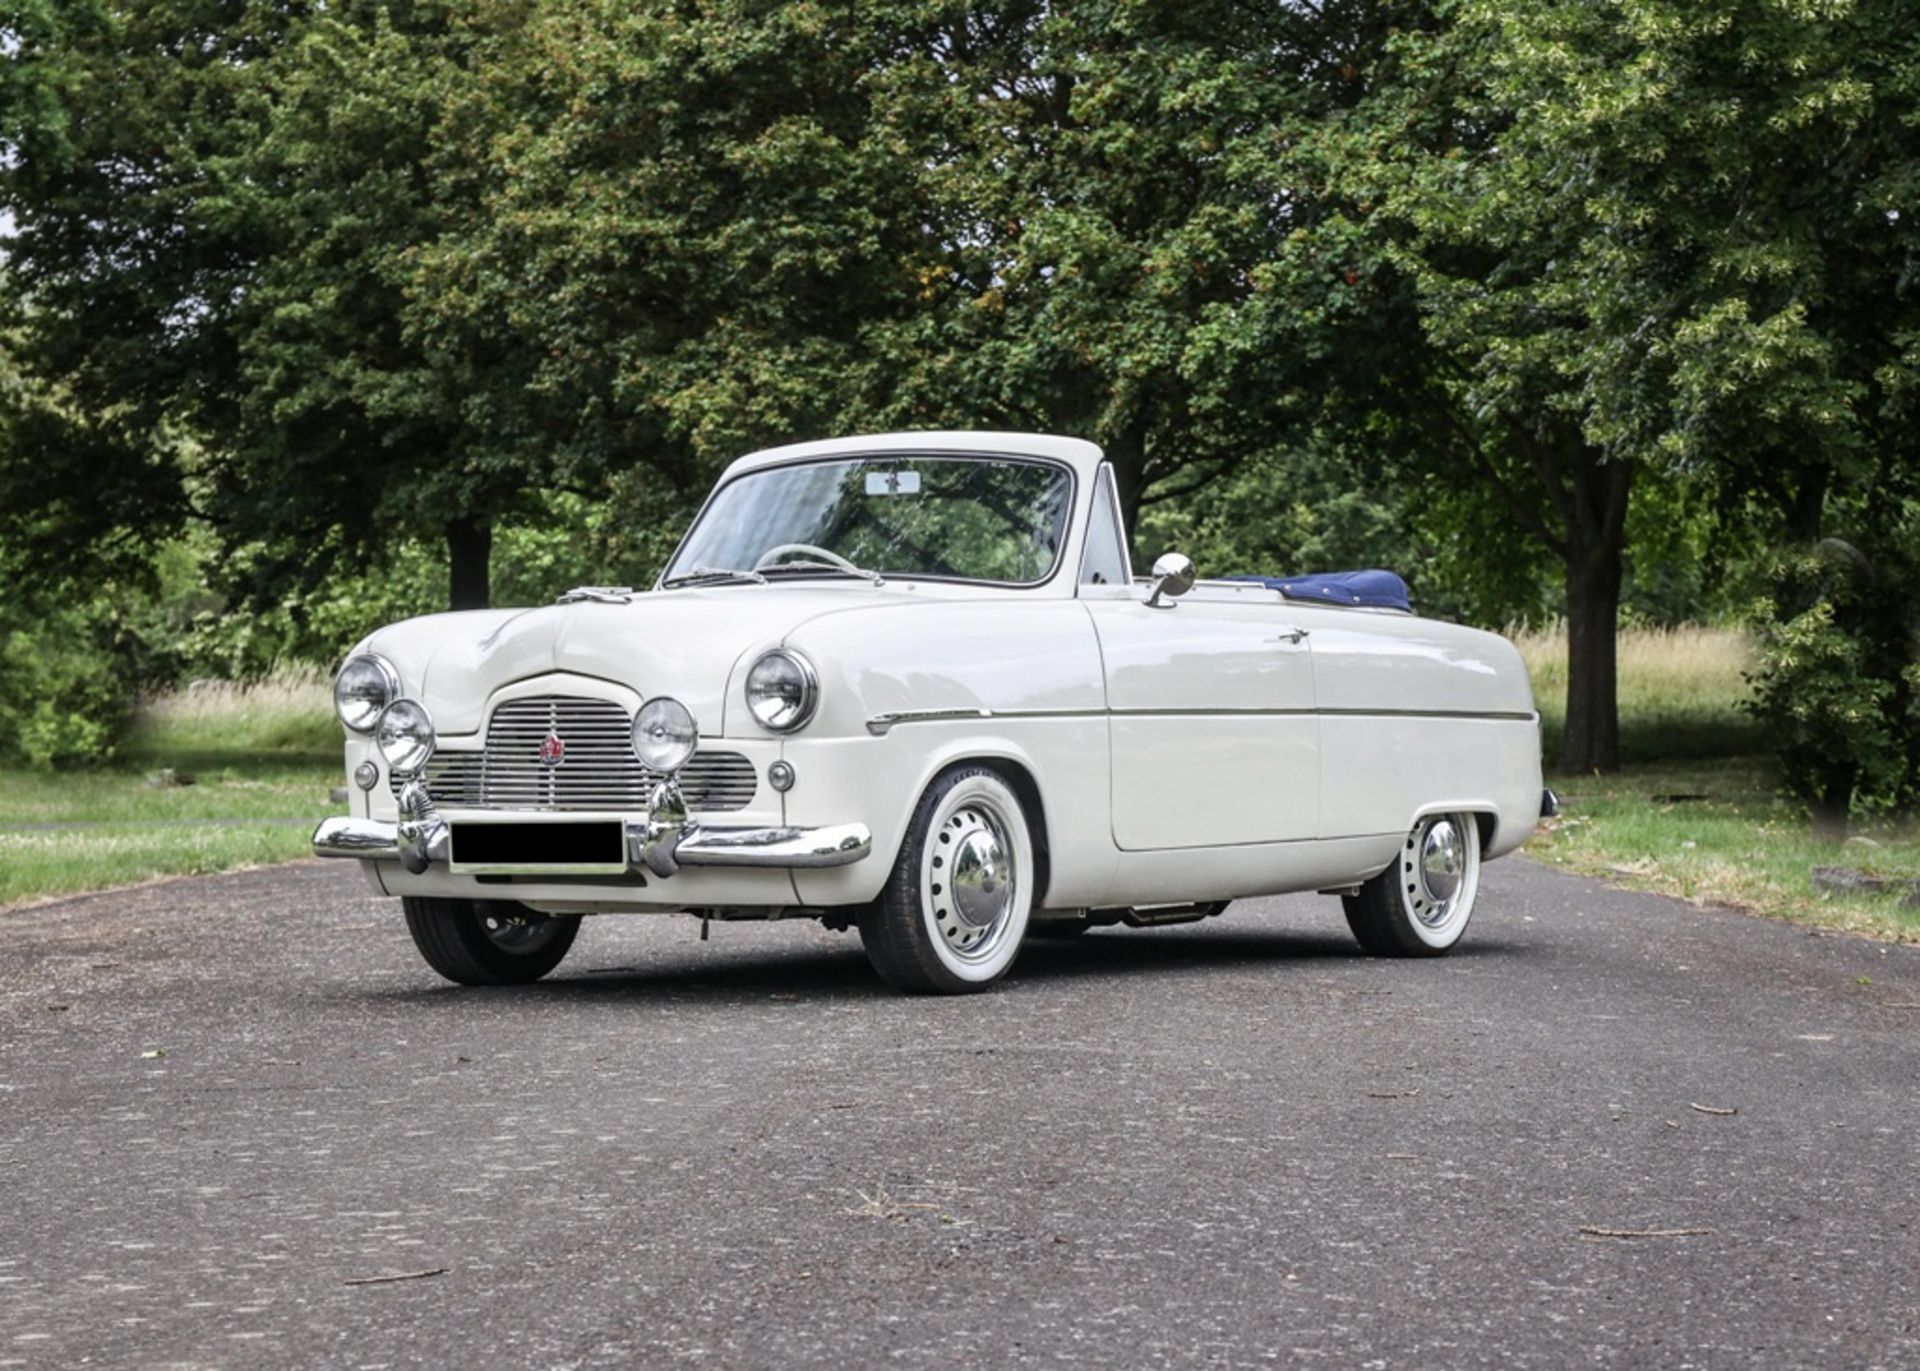 1955 Ford Consul Mk. I Convertible - Image 3 of 14